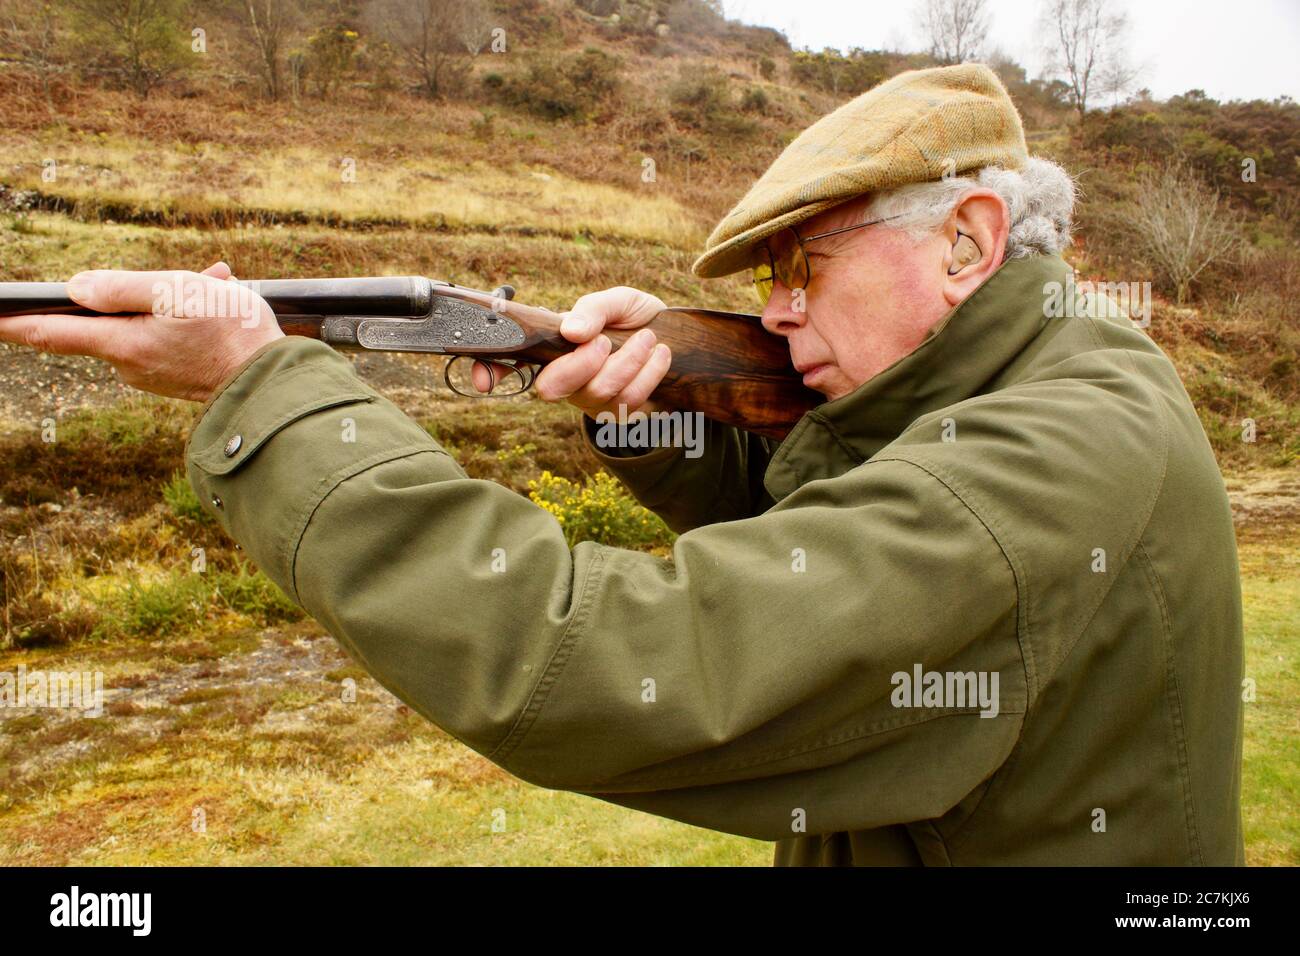 Gun-fitting, English Side By Side, Shotgun, 1904 Shotgun, Side Lock Ejector, Traditional, Field Sport, Countryside, Country Pursuit. Stock Photo